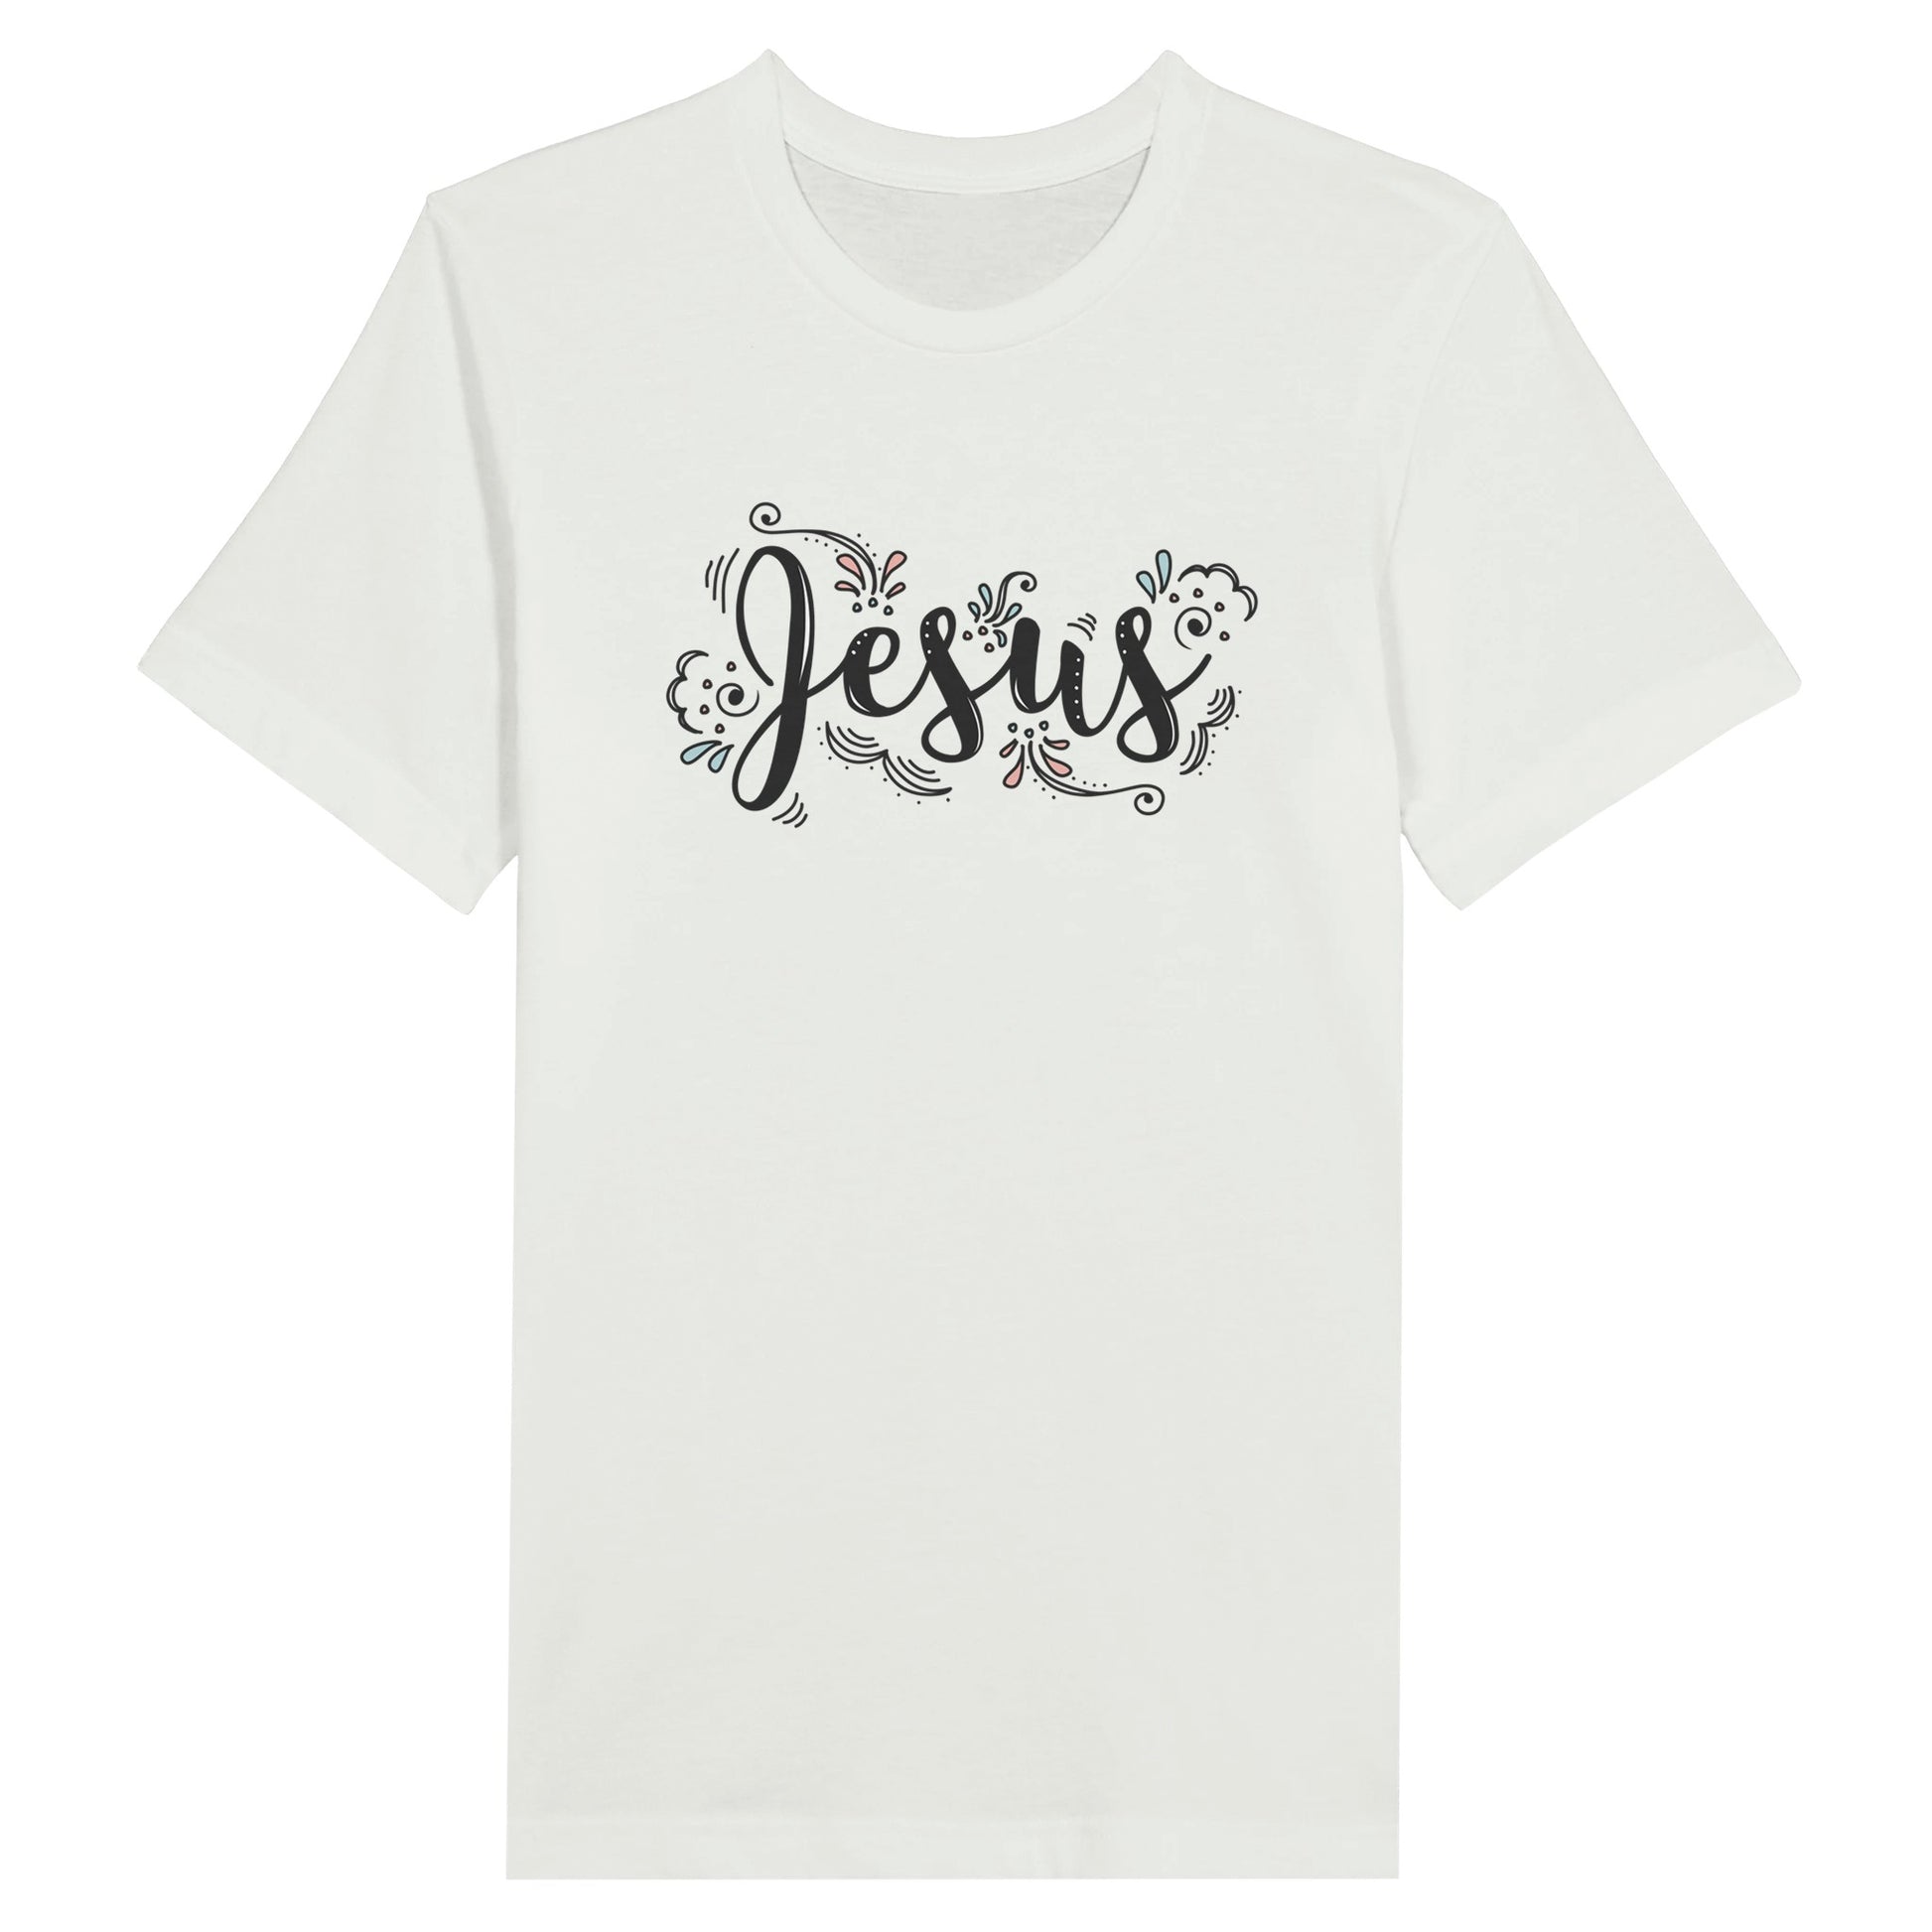 An image of Jesus (Hand Lettering) | Premium Unisex Christian T-shirt available at 3rd Day Christian Clothing UK